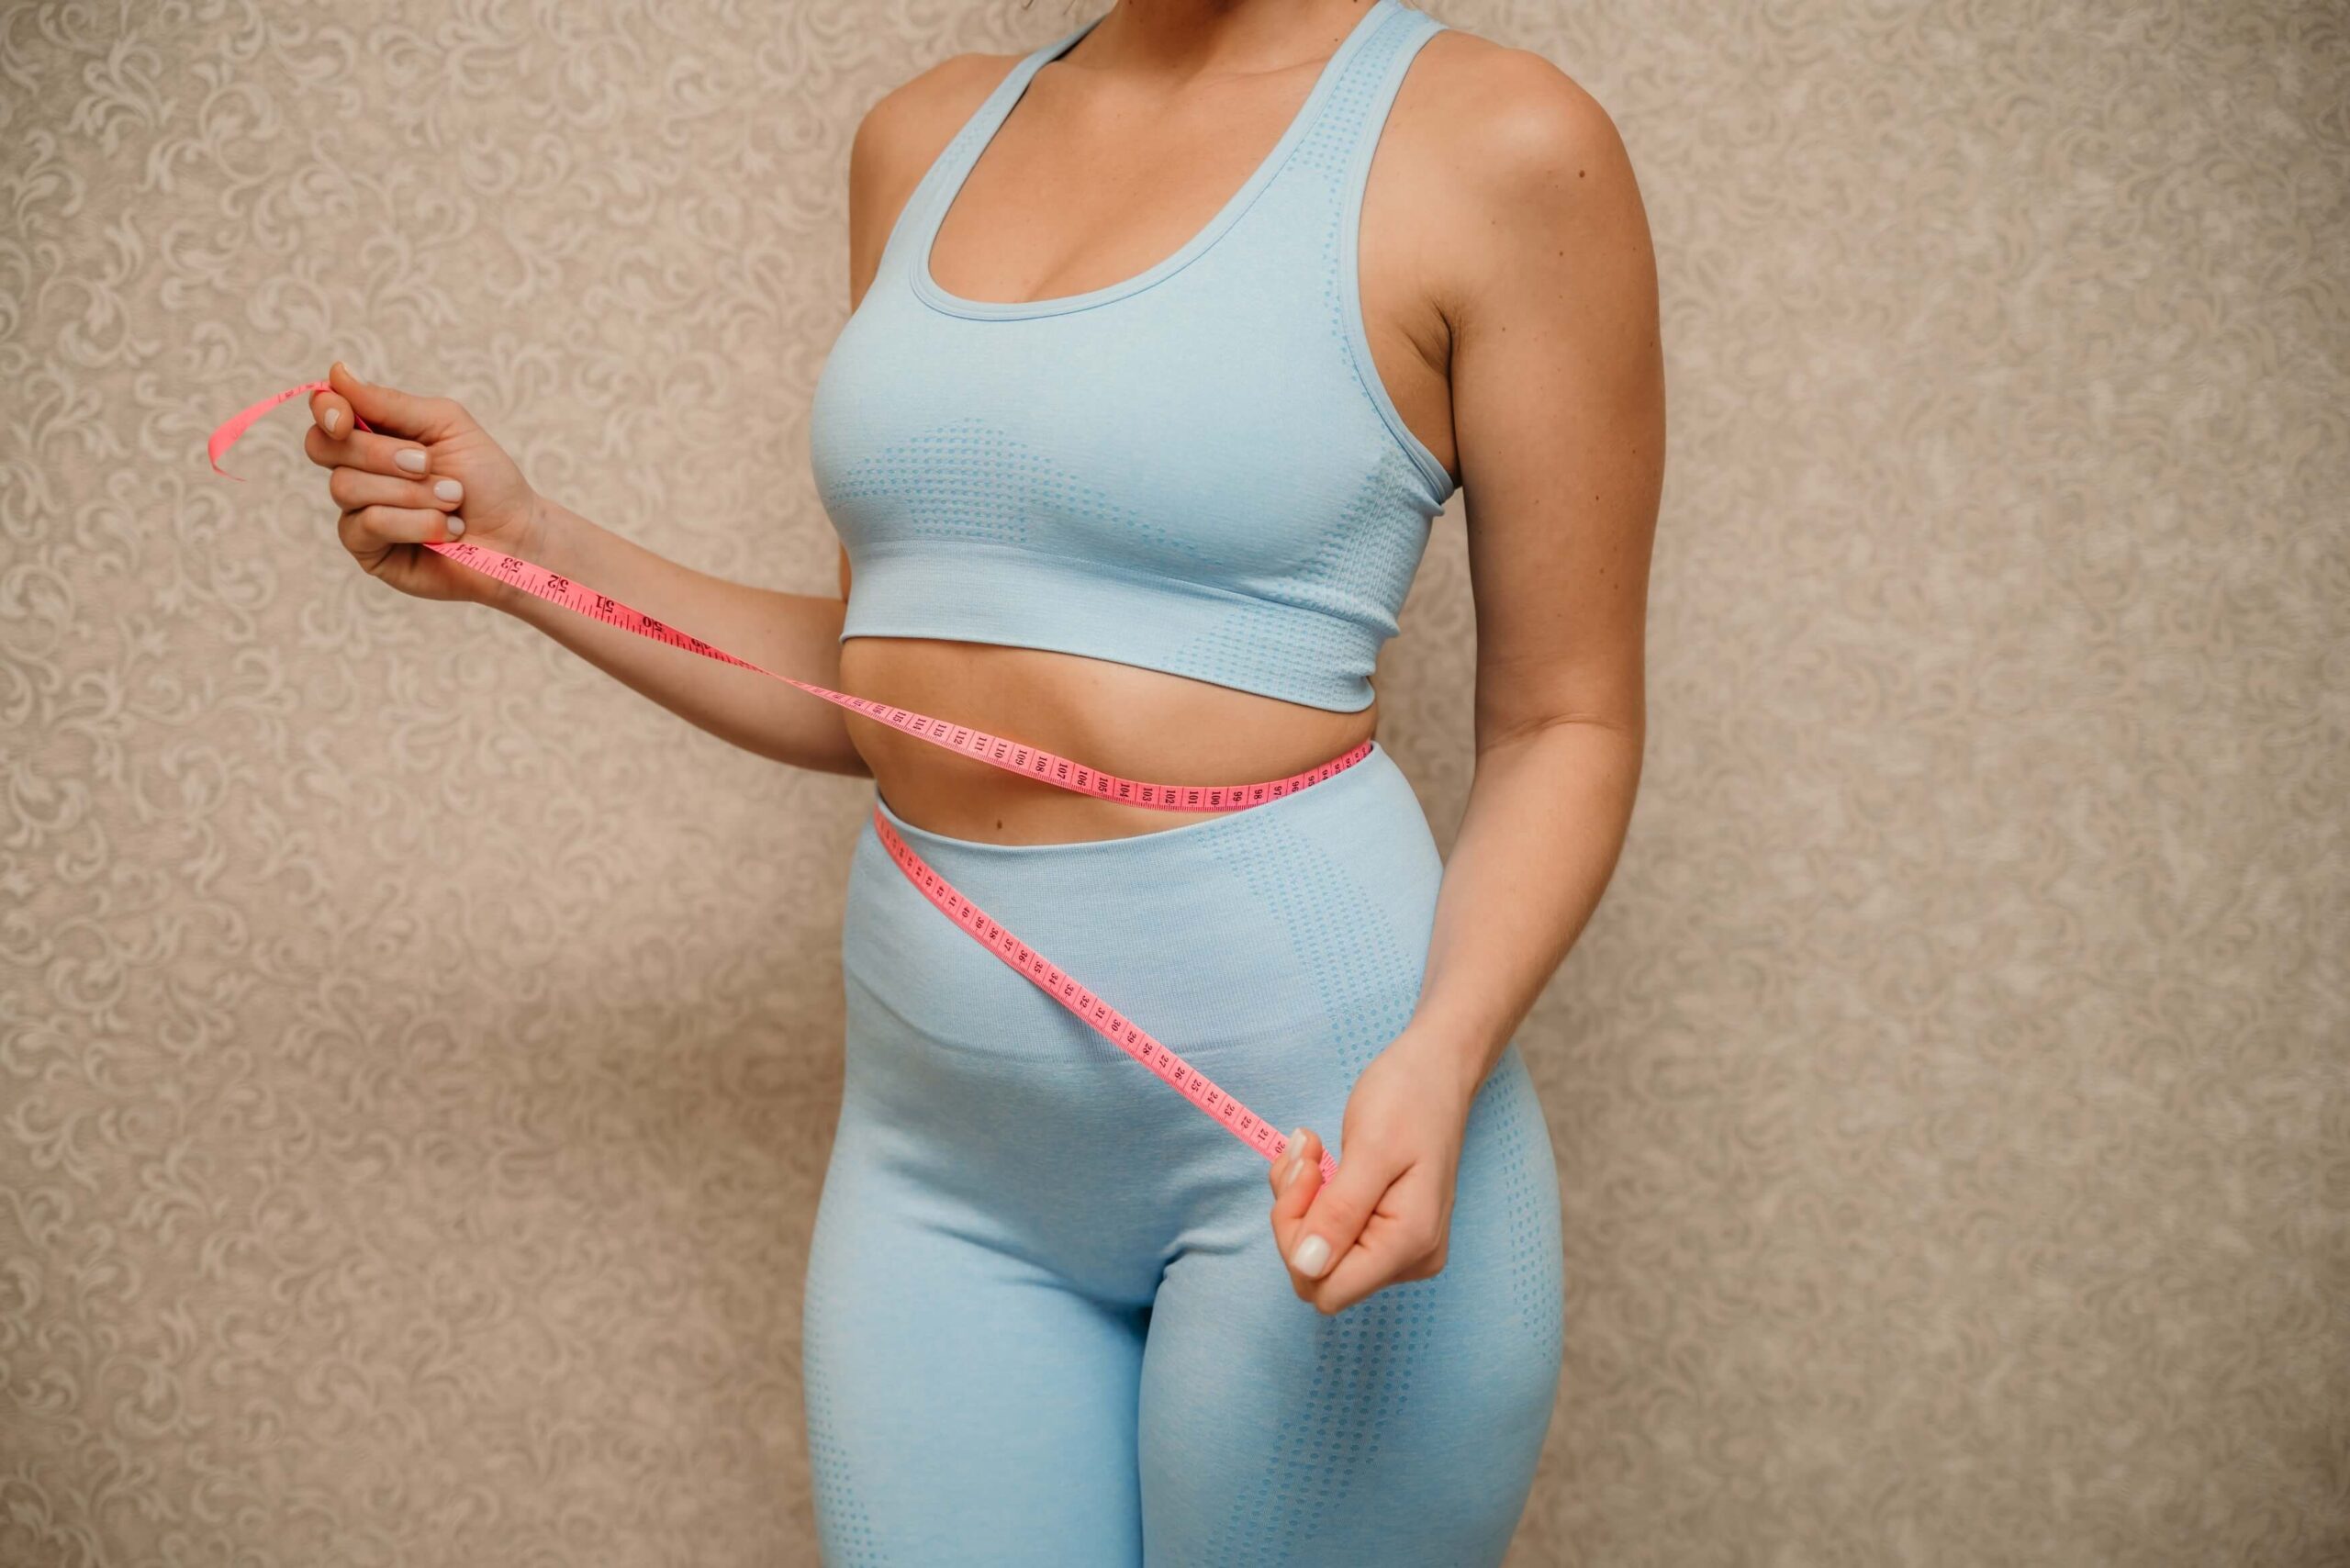 How Much Fat Can Be Safely Removed During Liposuction?